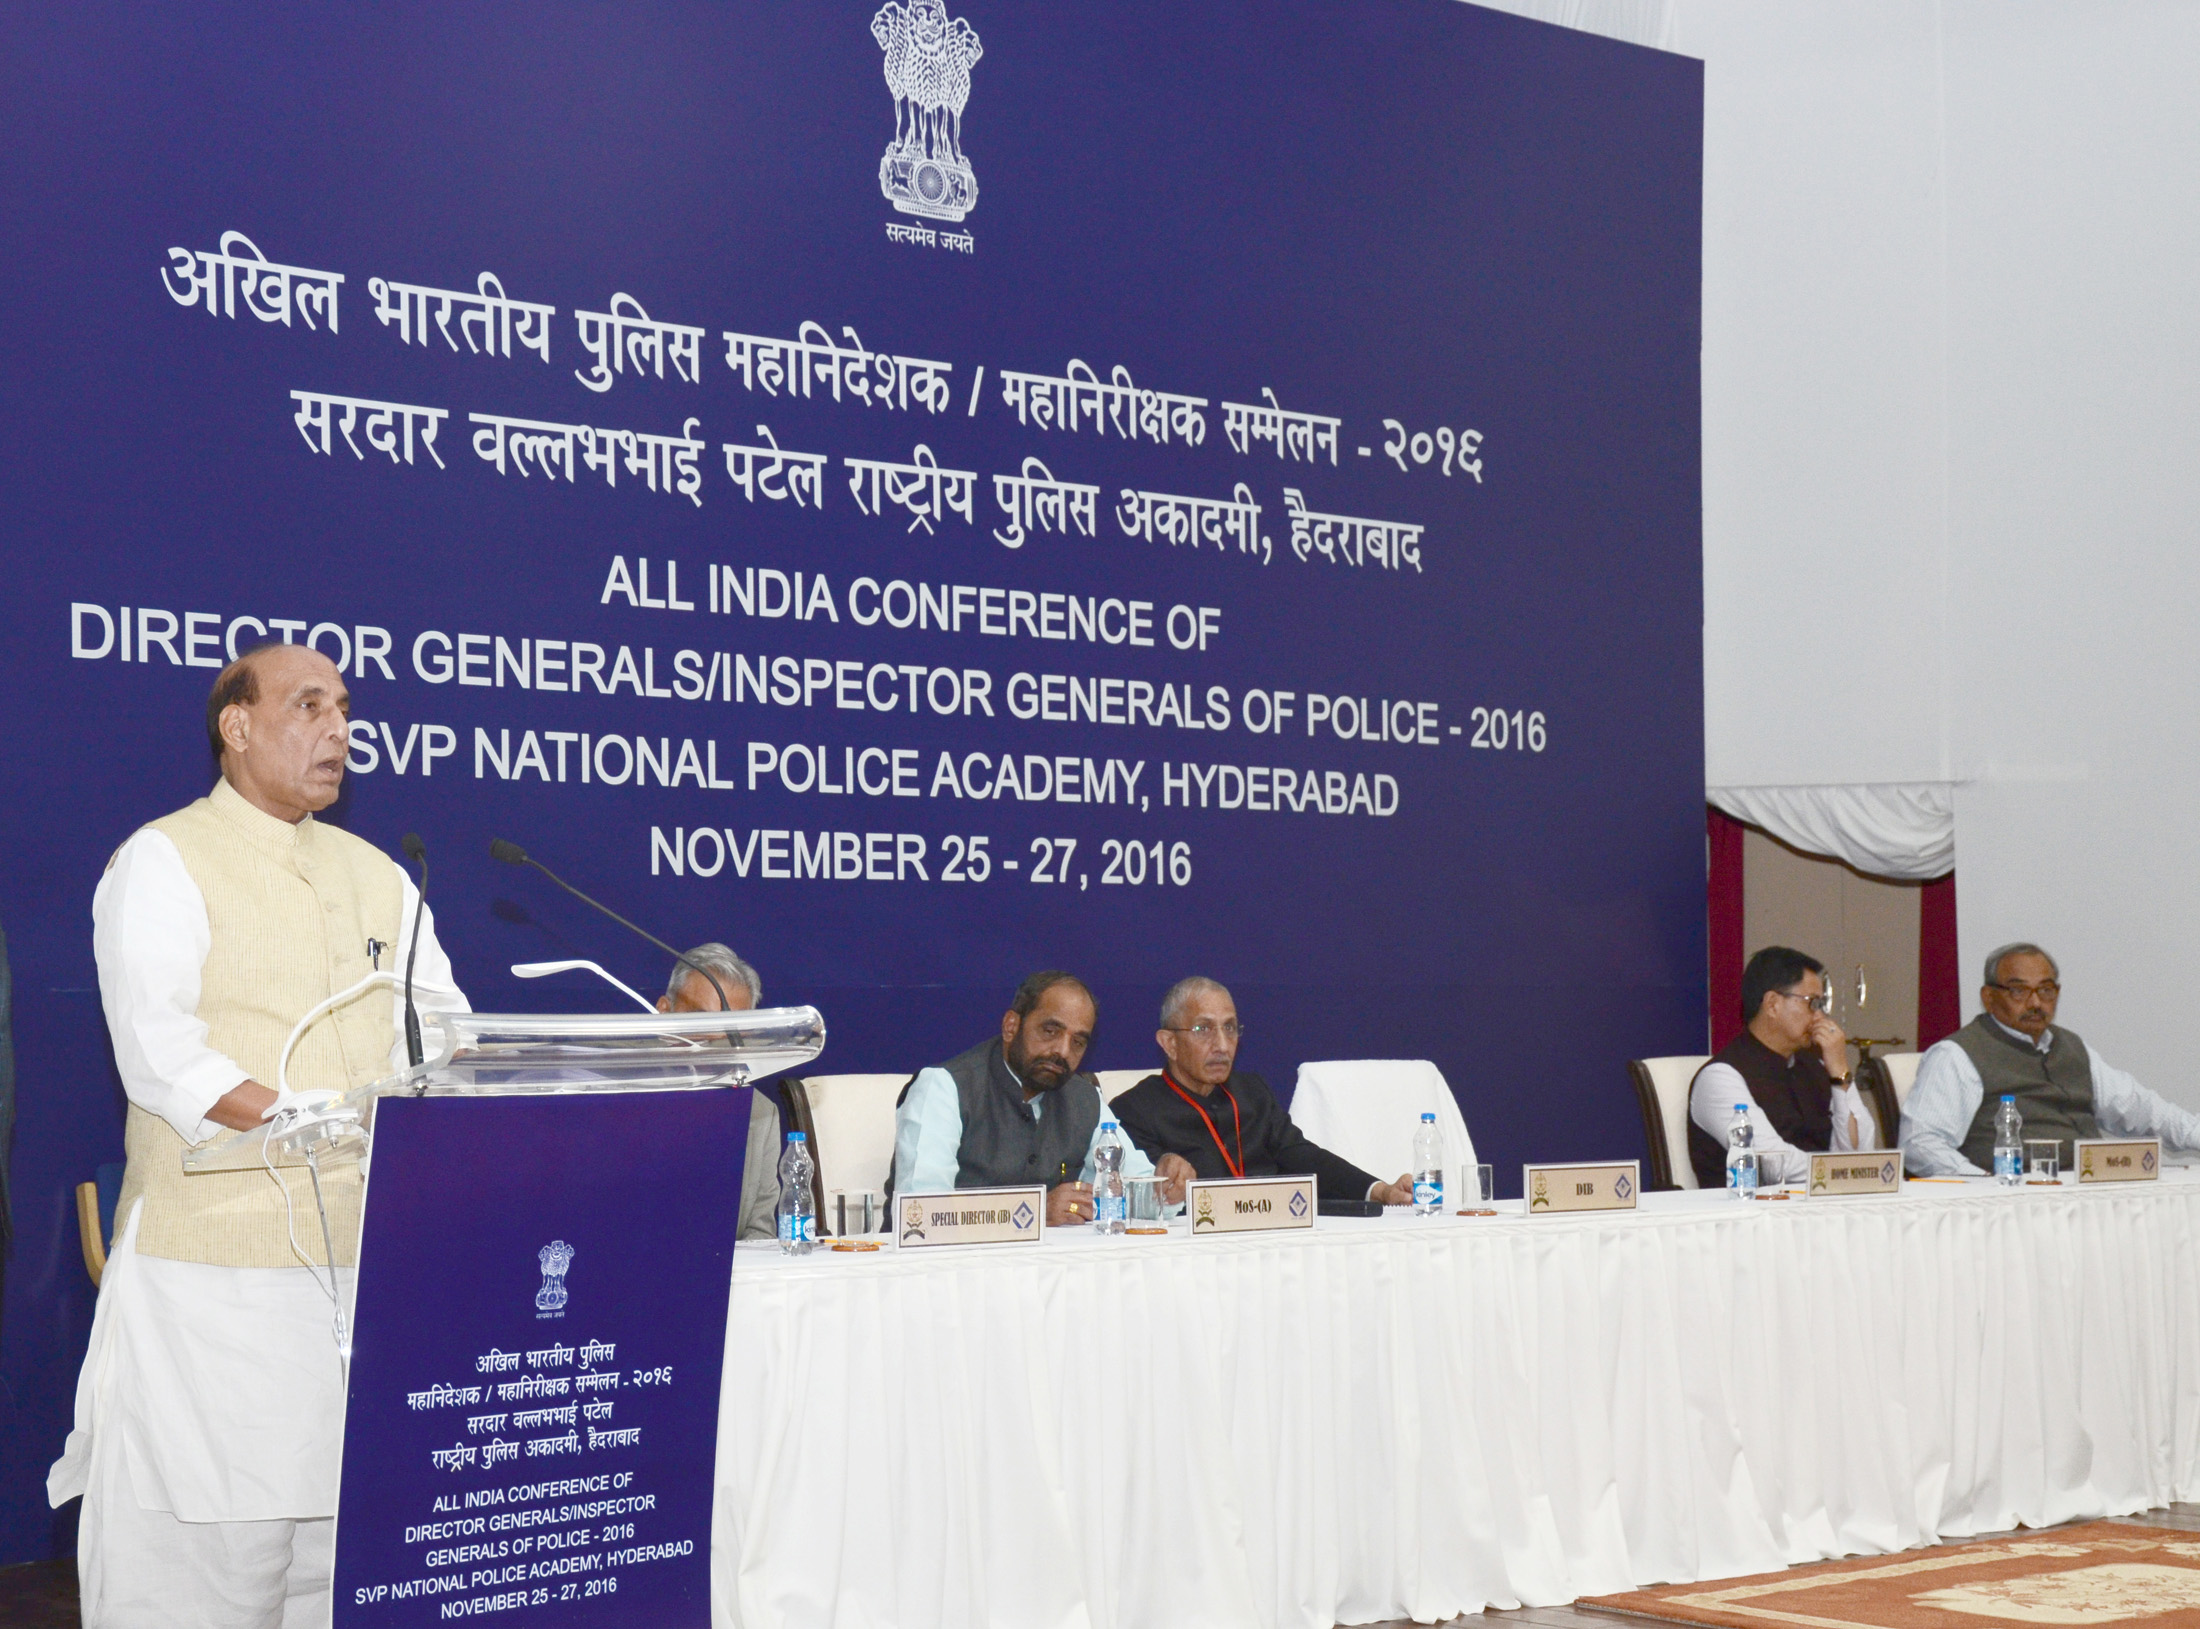 The Union Home Minister, Shri Rajnath Singh addressing at the inauguration of the All India Conference of DGPs/IGPs, 2016, at Sardar Vallabhbhai Patel National Police Academy, in Hyderabad on November 25, 2016. 	The Ministers of State for Home Affairs, Shri Hansraj Gangaram Ahir & Shri Kiren Rijiju, the Union Home Secretary, Shri Rajiv Mehrishi and other dignitaries are also seen.